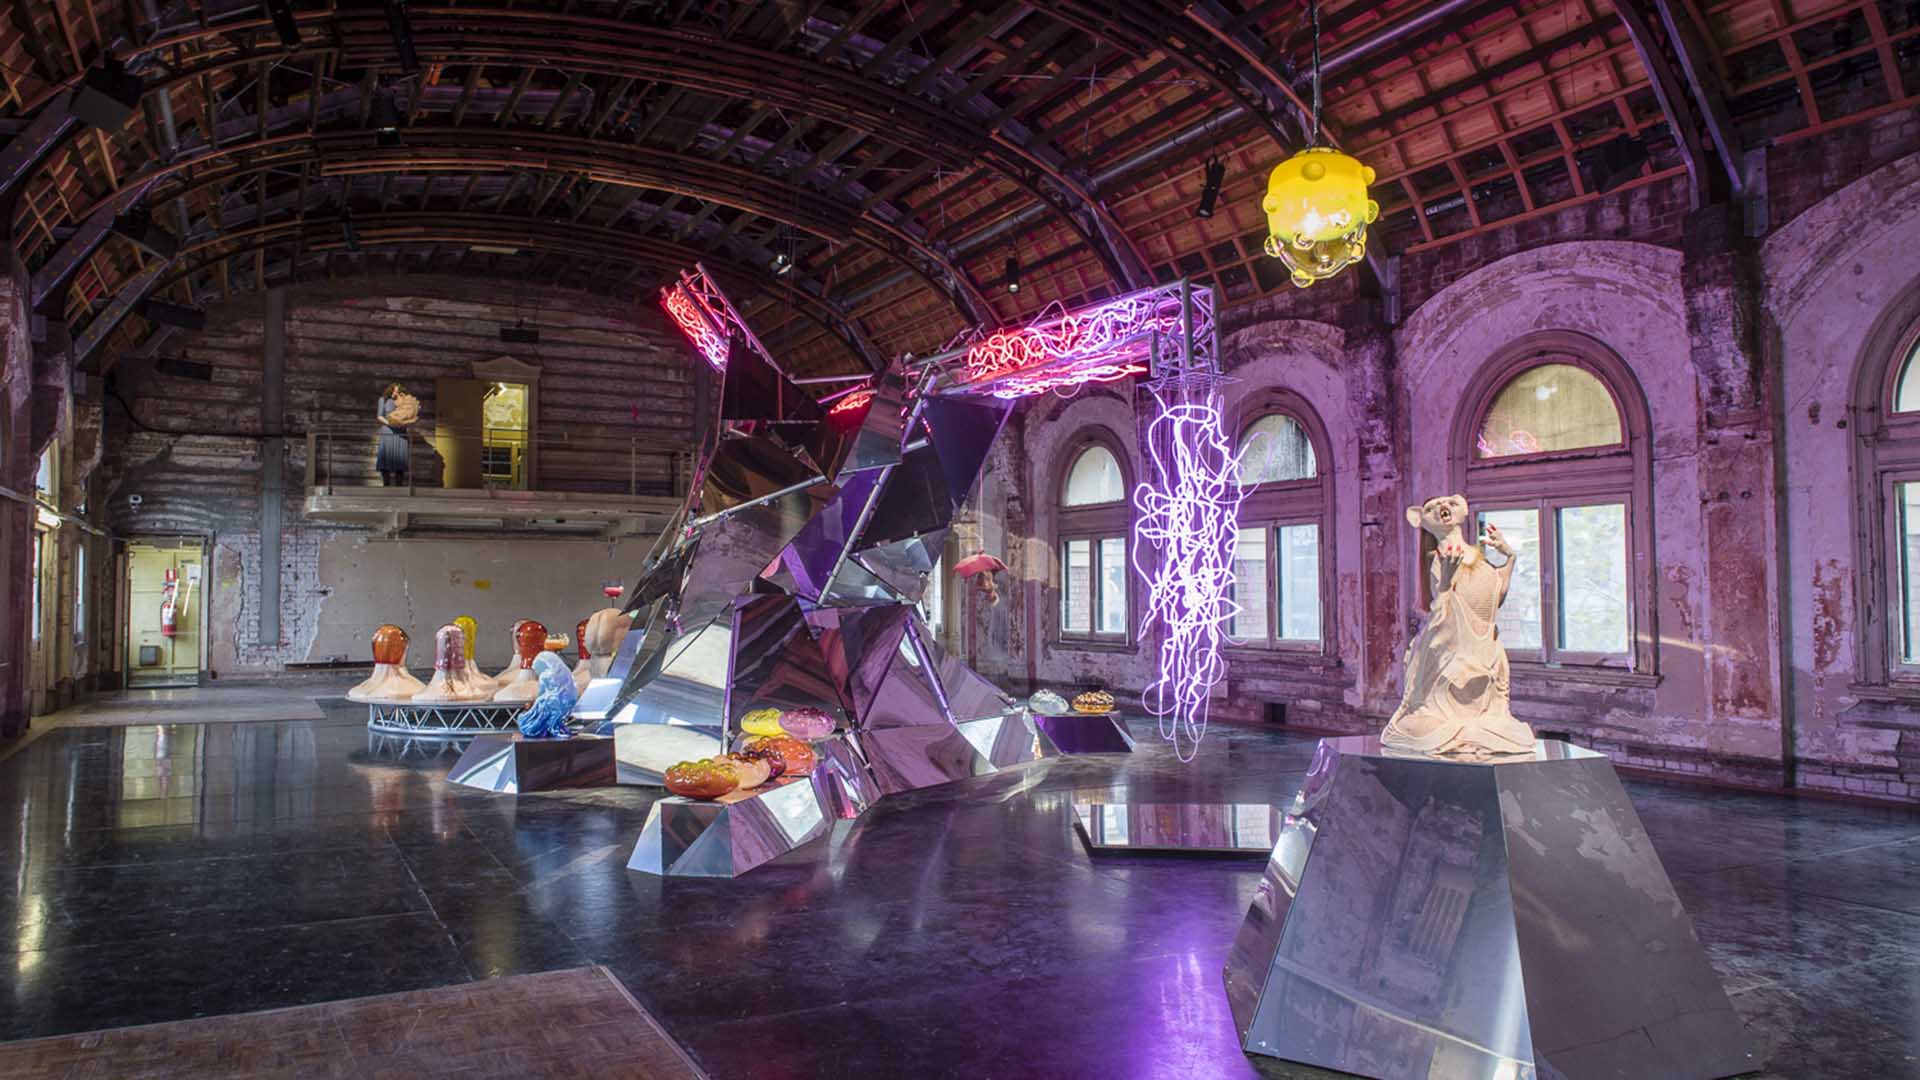 Patricia Piccinini's Otherworldly Flinders Street Station Ballroom Exhibition Reopens in November